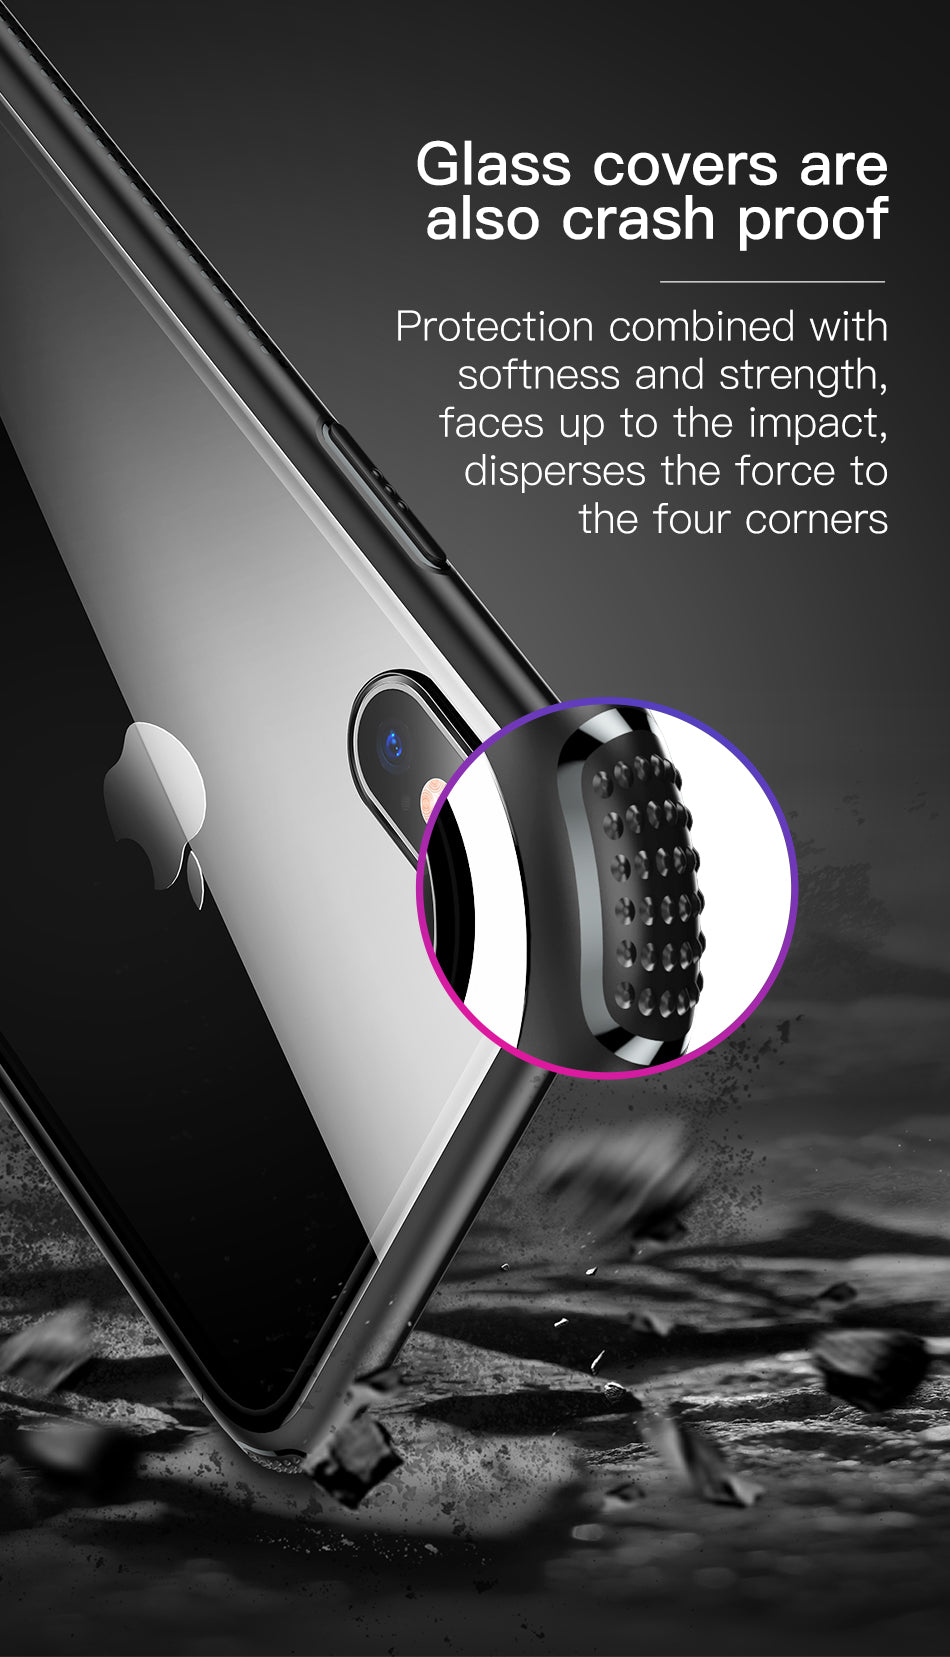 See-through By Baseus Glass Back + Bumper Frame iPhone Xs Max Black